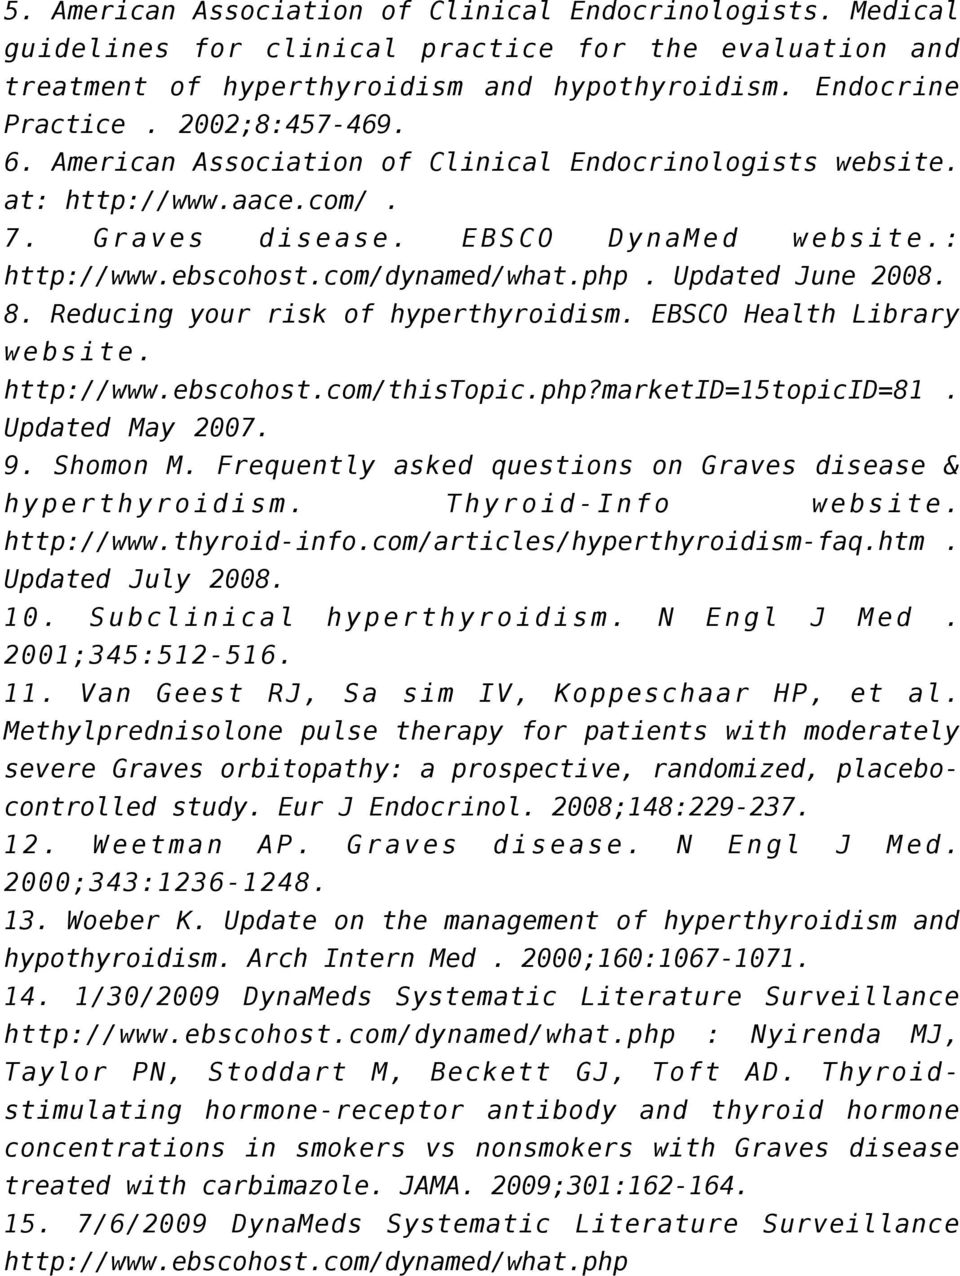 Updated June 2008. 8. Reducing your risk of hyperthyroidism. EBSCO Health Library website. http://www.ebscohost.com/thistopic.php?marketid=15topicid=81. Updated May 2007. 9. Shomon M.